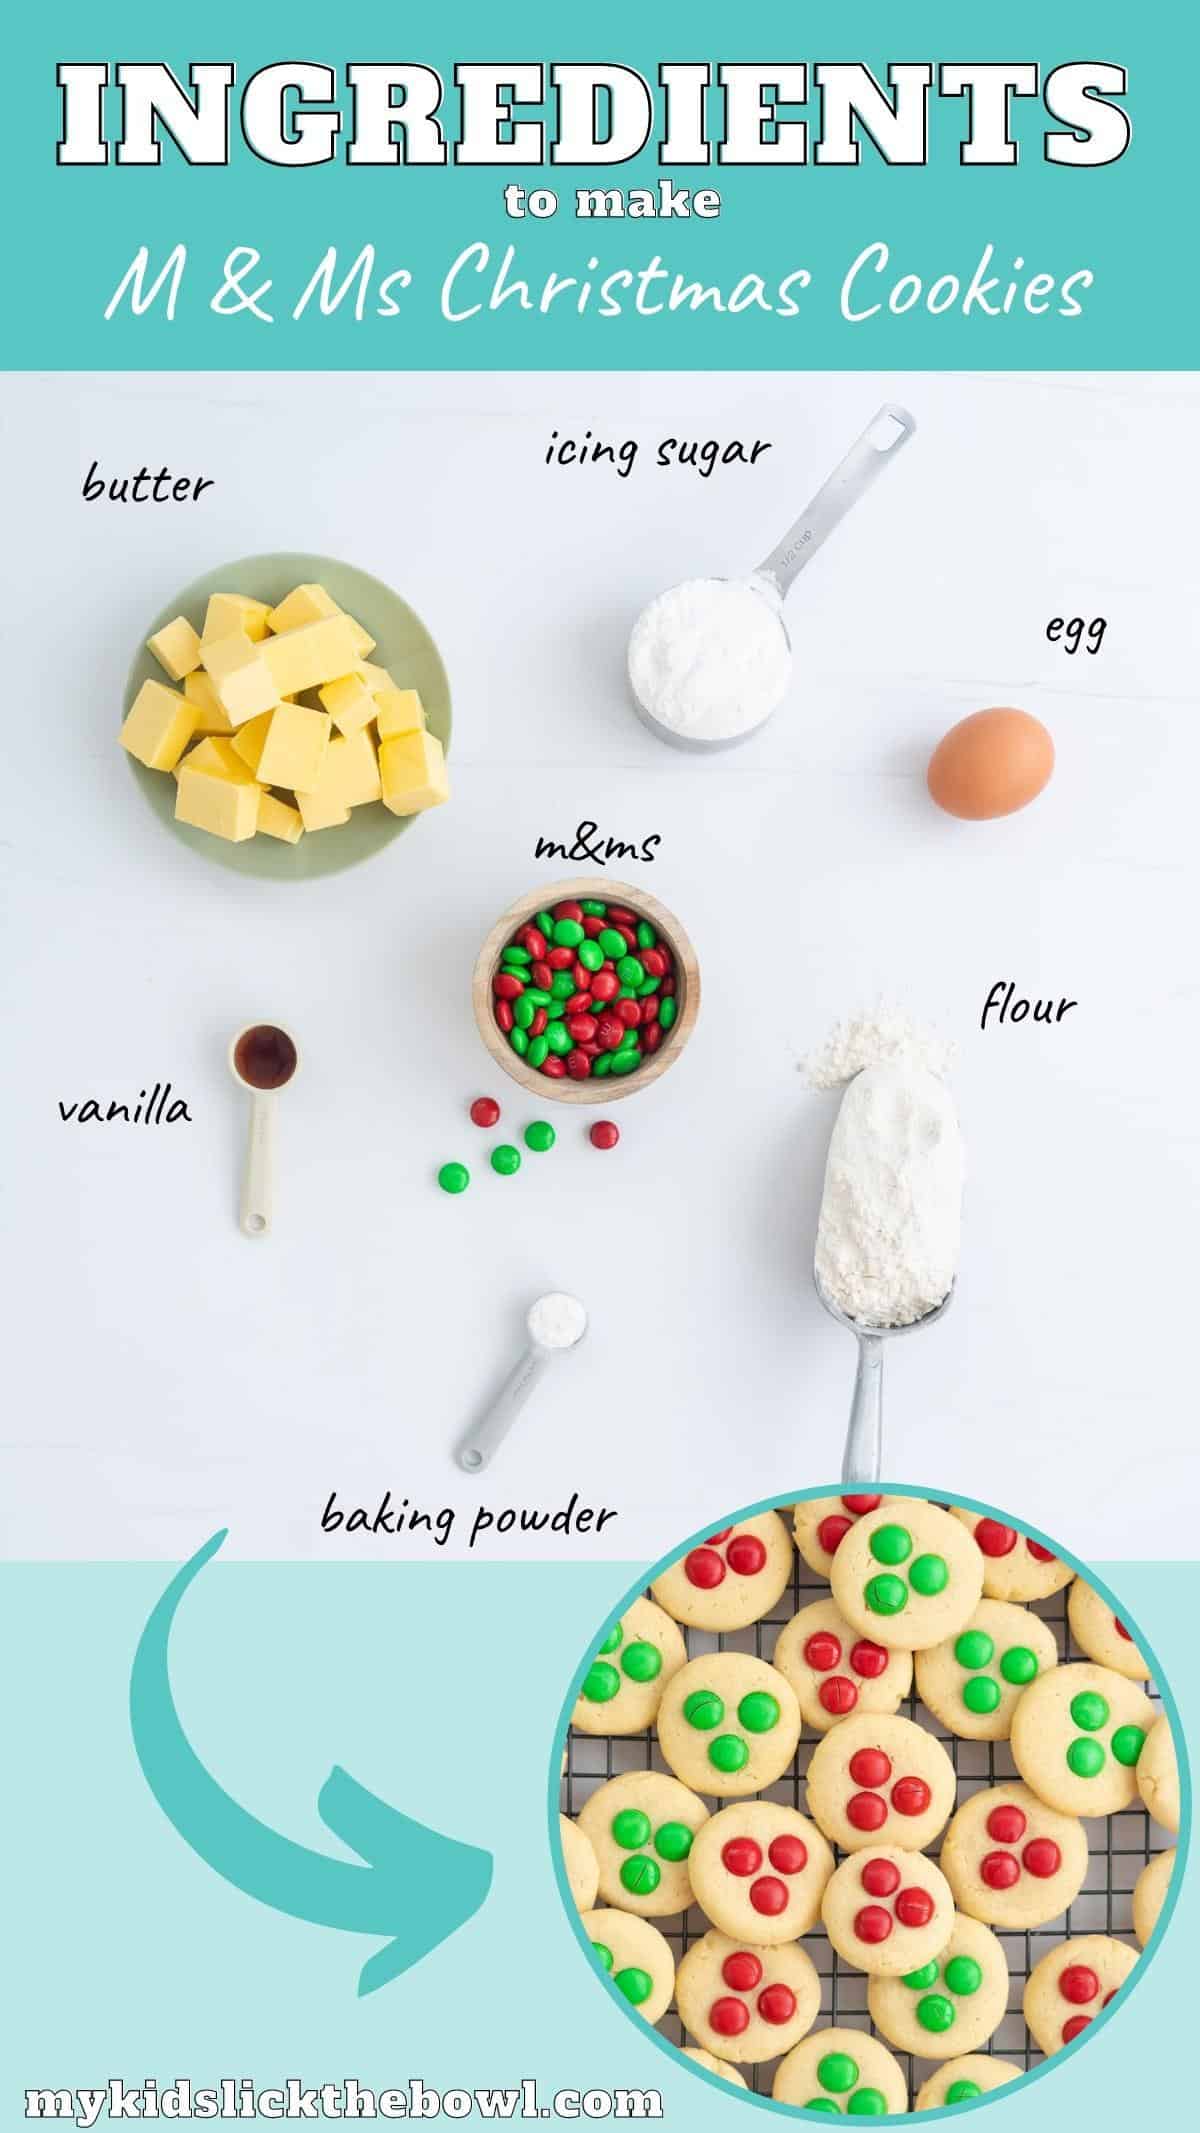 The ingredients to make m and ms Chrismtas cookies laid out on a bench top.